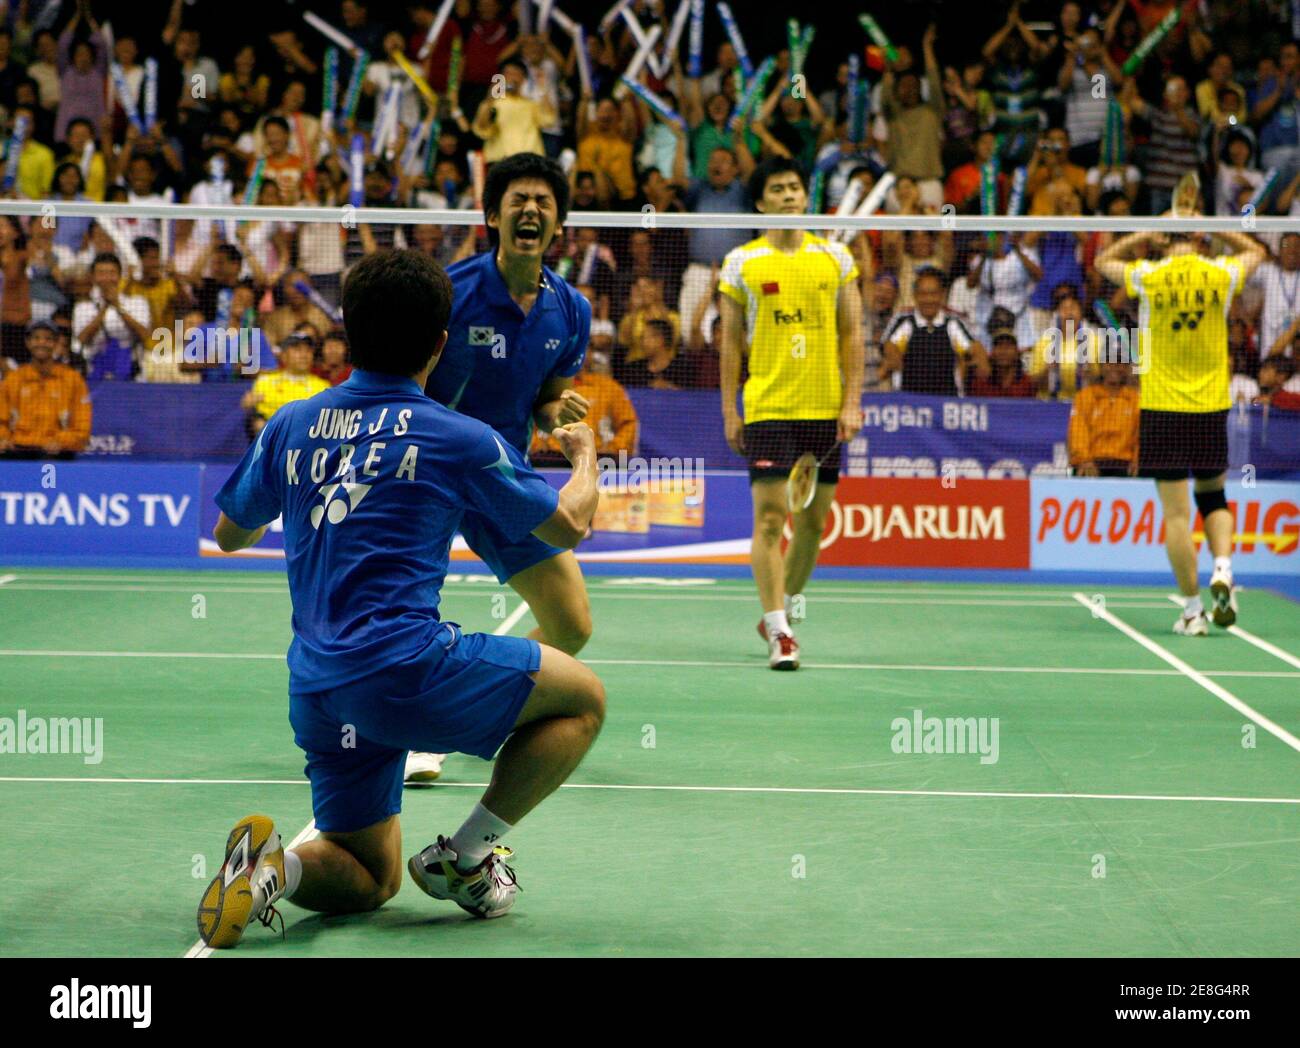 South Korea's Jung Jae-sung (L) and Lee Yong Dae react after beating China's Fu Haifeng and Cai Yun in the doubles final of their Thomas Cup badminton tournament match in Jakarta May 18, 2008. REUTERS/Beawiharta (INDONESIA) Stock Photo